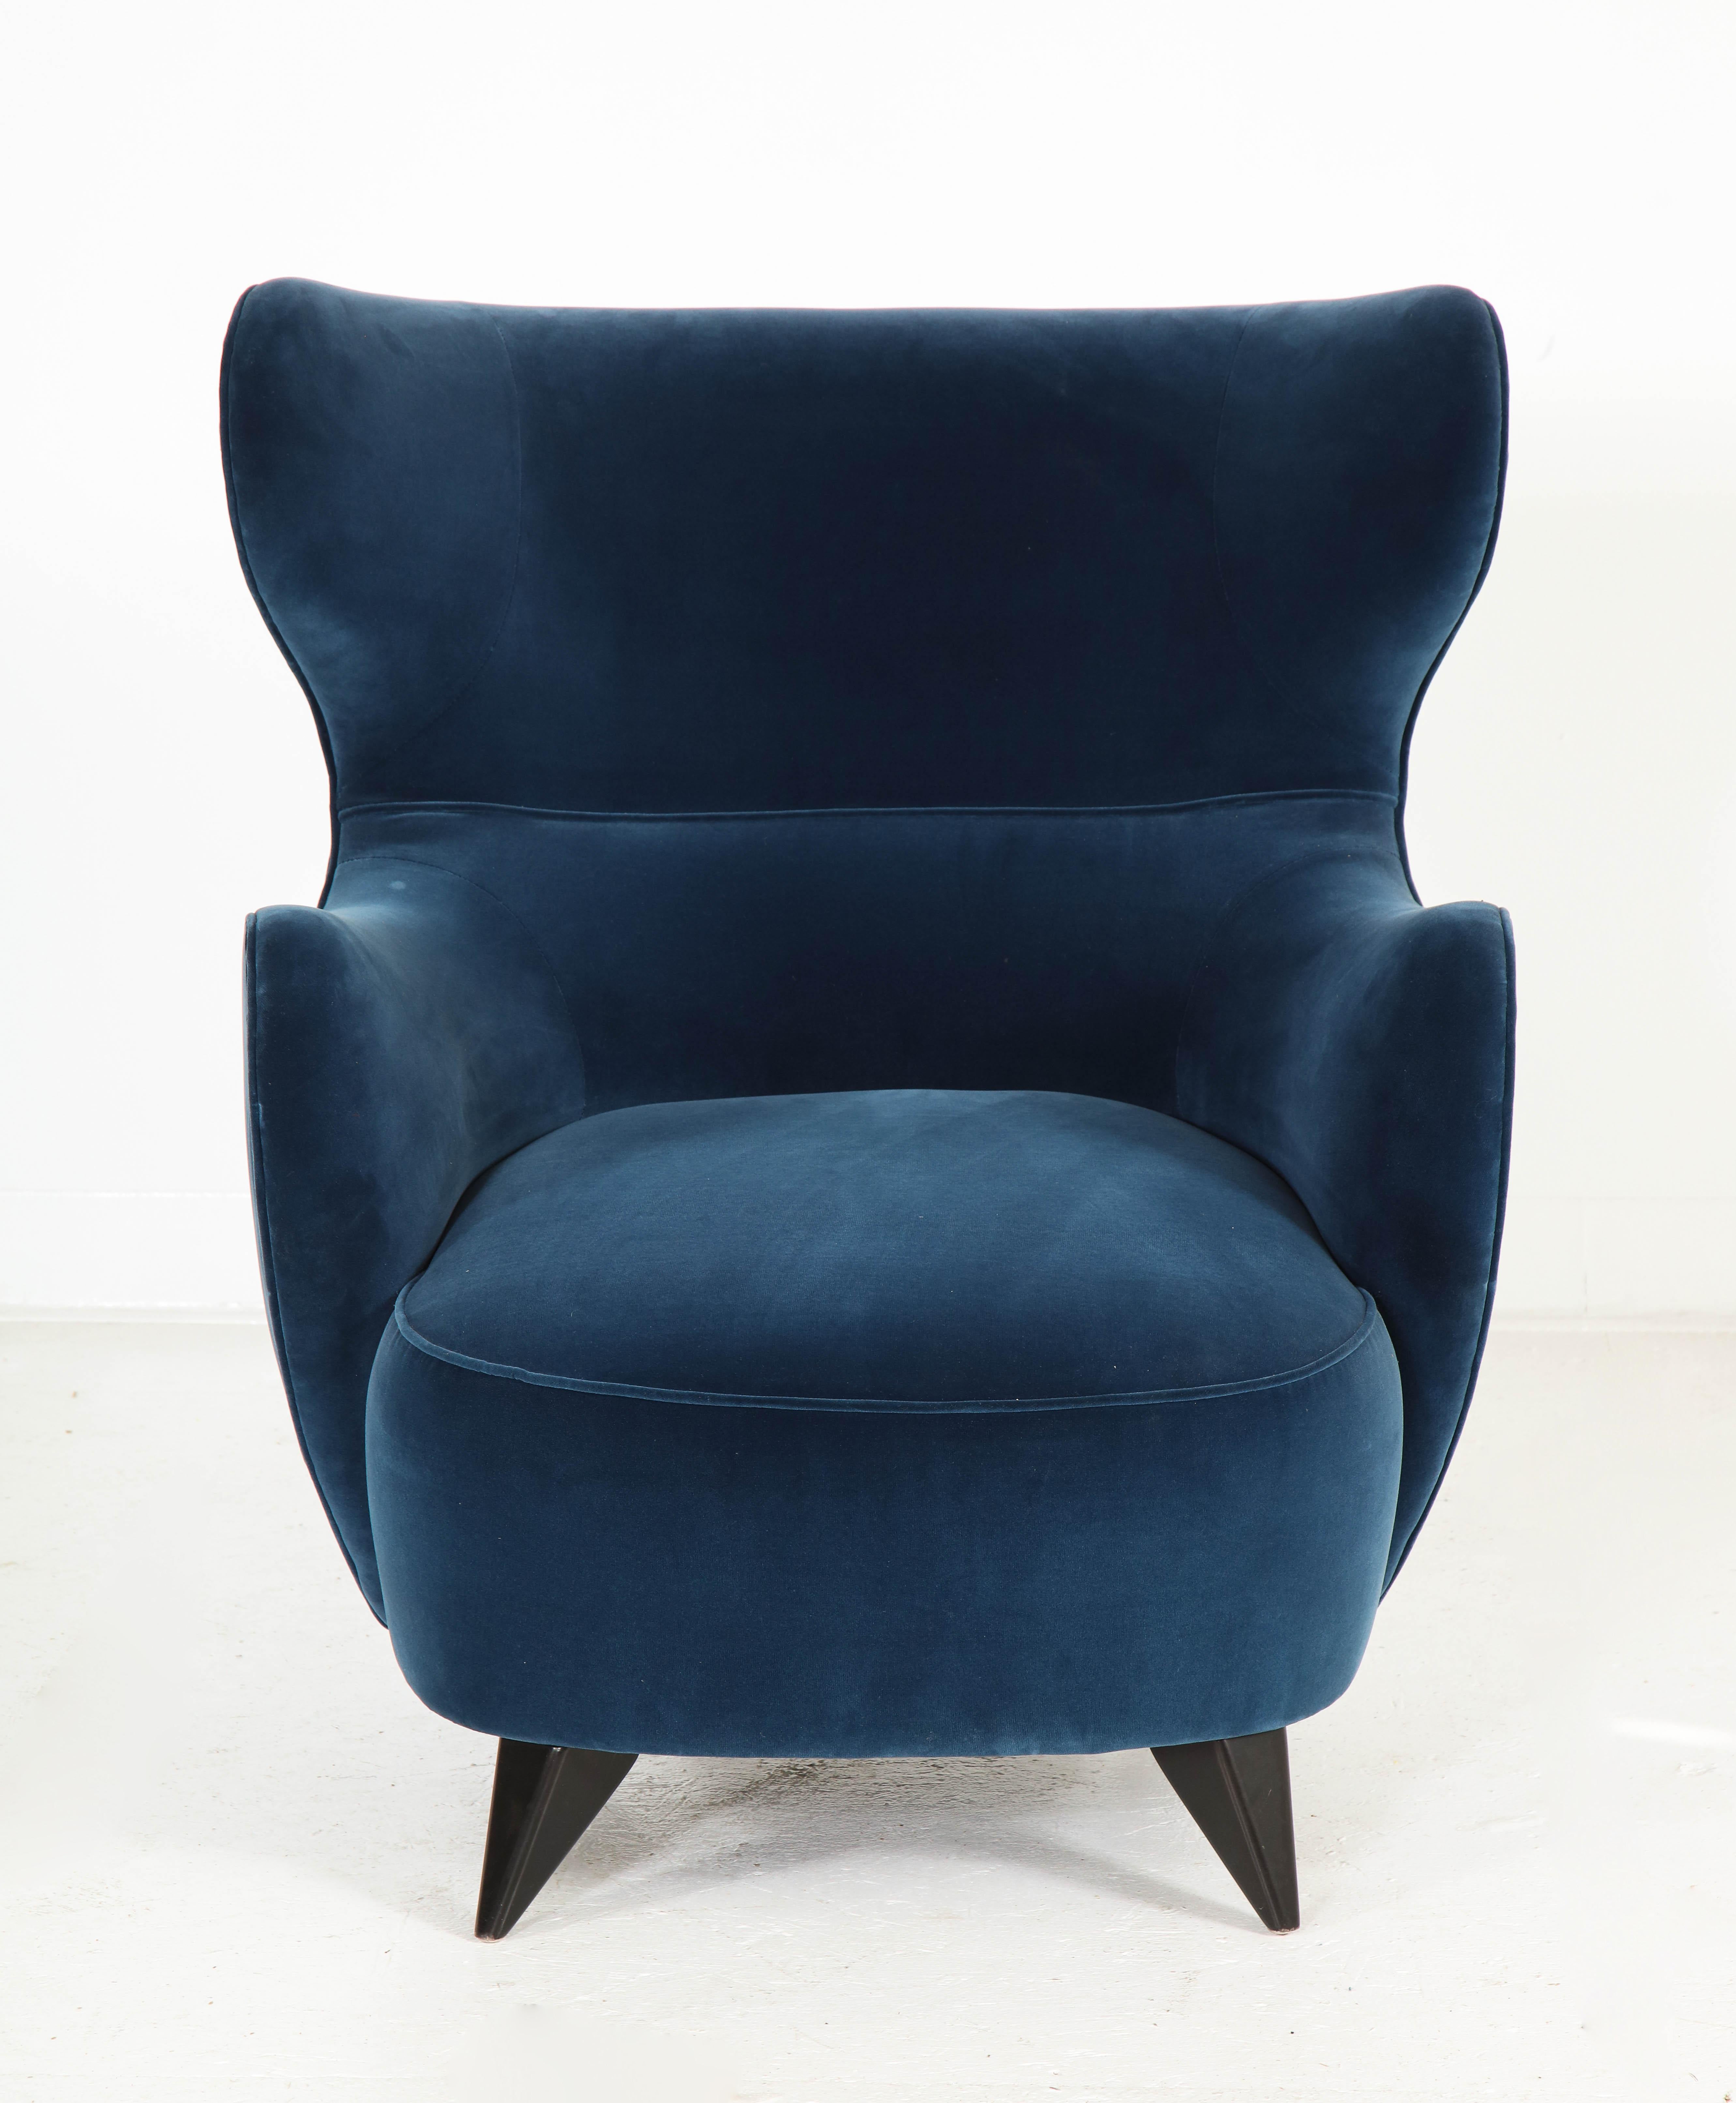 Modern Wing Chair in Blue w/ Maple Wood Base Offered by Vladimir Kagan Design Group